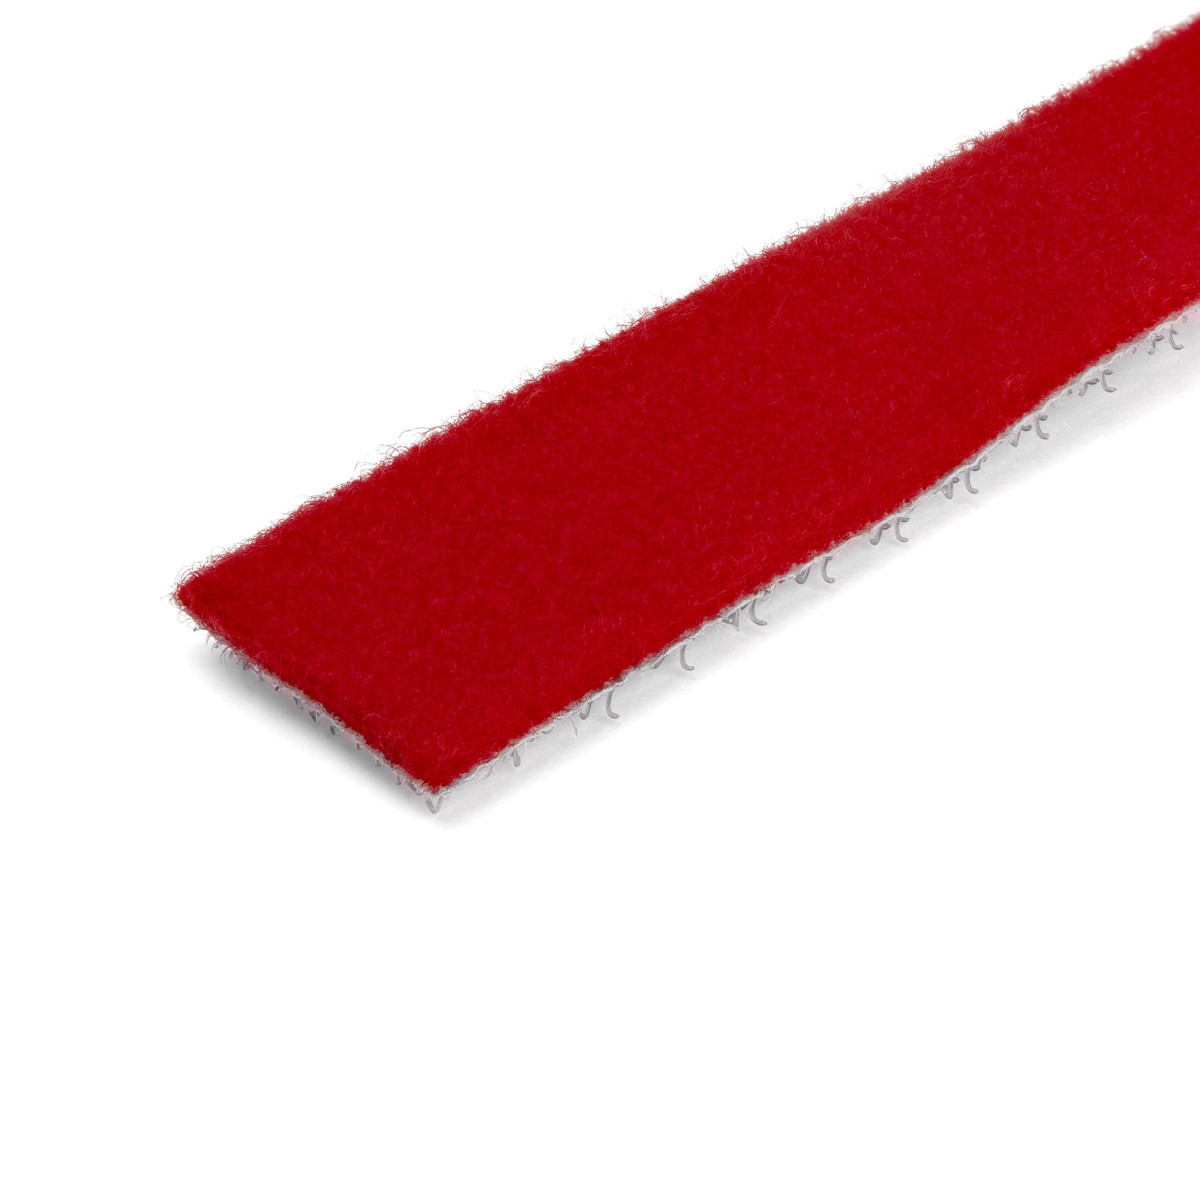 Cable - Hook and Loop - 25ft. - Red